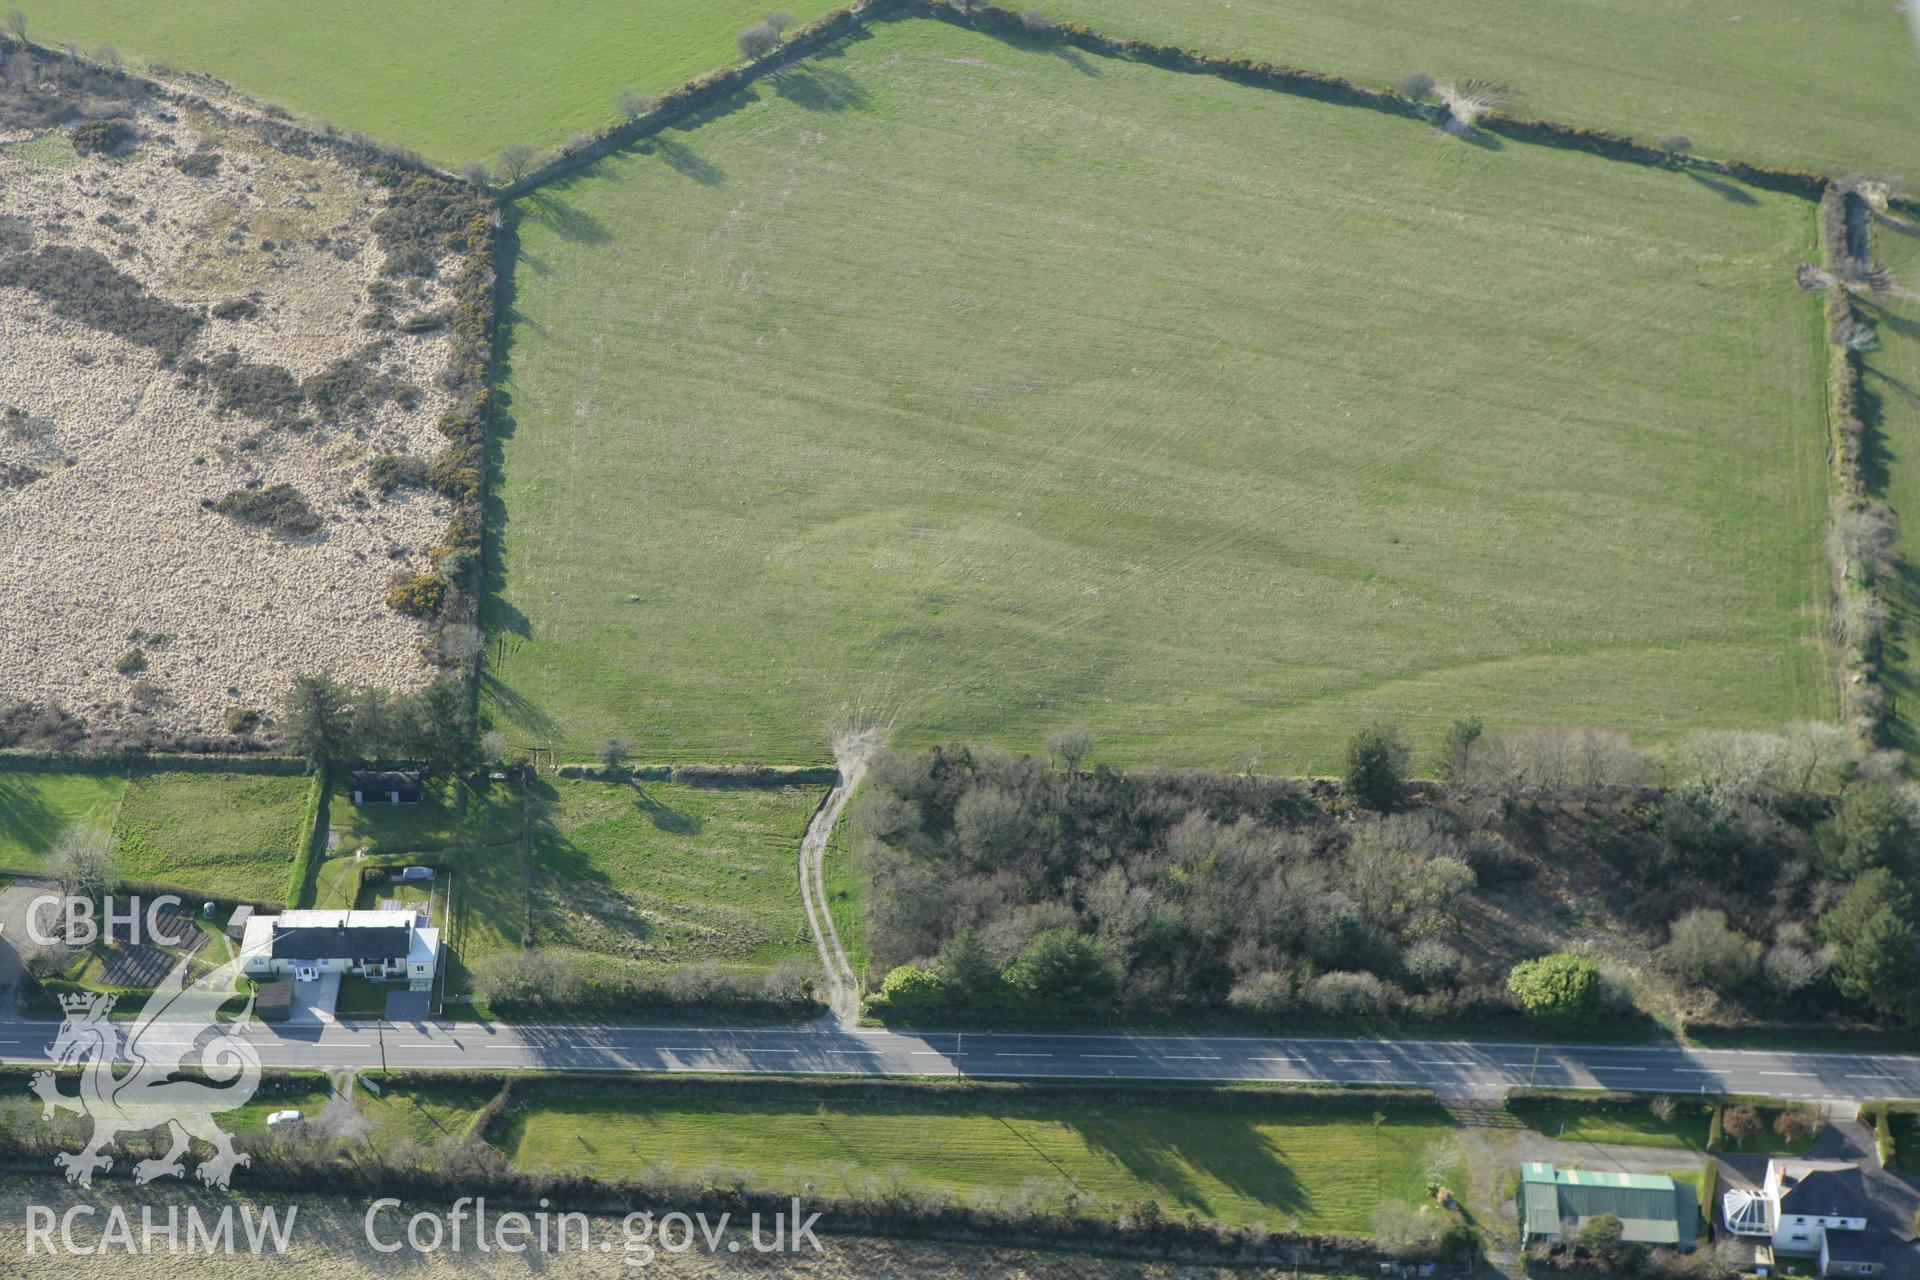 RCAHMW colour oblique aerial photograph of Precelly Farm Barrow. Taken on 13 April 2010 by Toby Driver